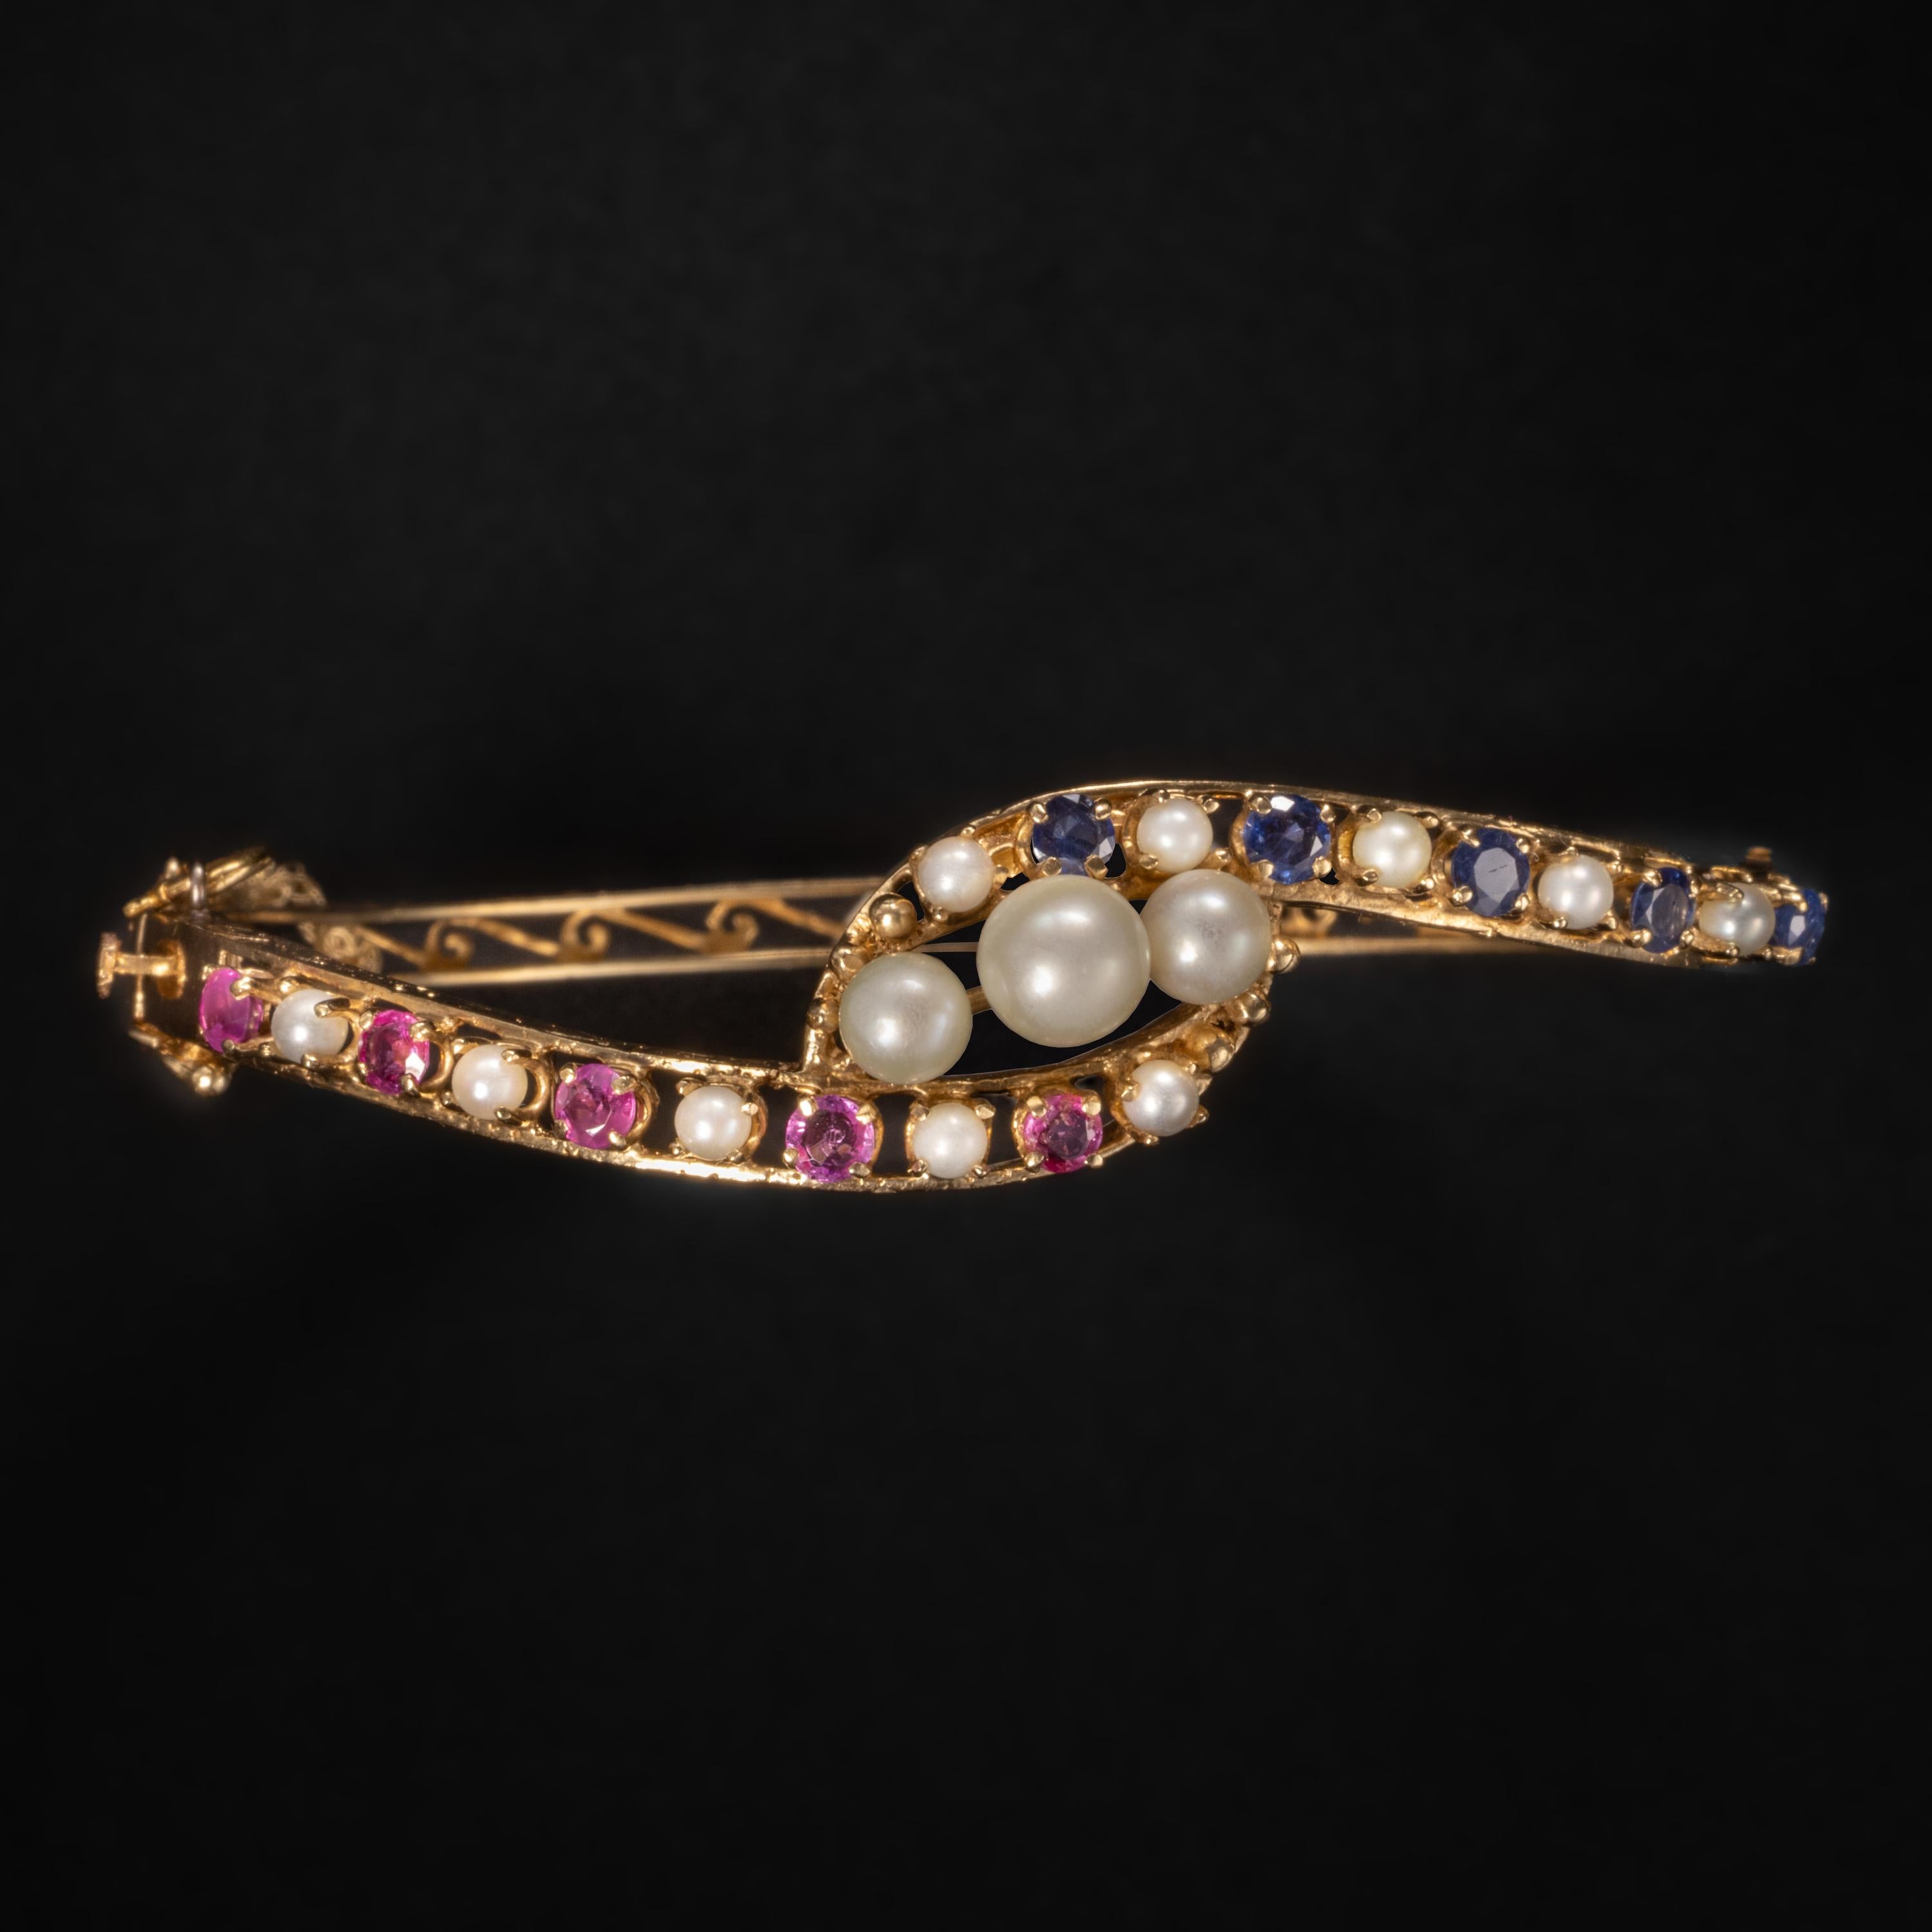 This Victorian pink & blue sapphire bangle with pearls was created in the late 1800s to early 1900s. It features 5 natural heated royal blue sapphires and five natural heated pink sapphires. Or rubies. There's enough red in these stones to